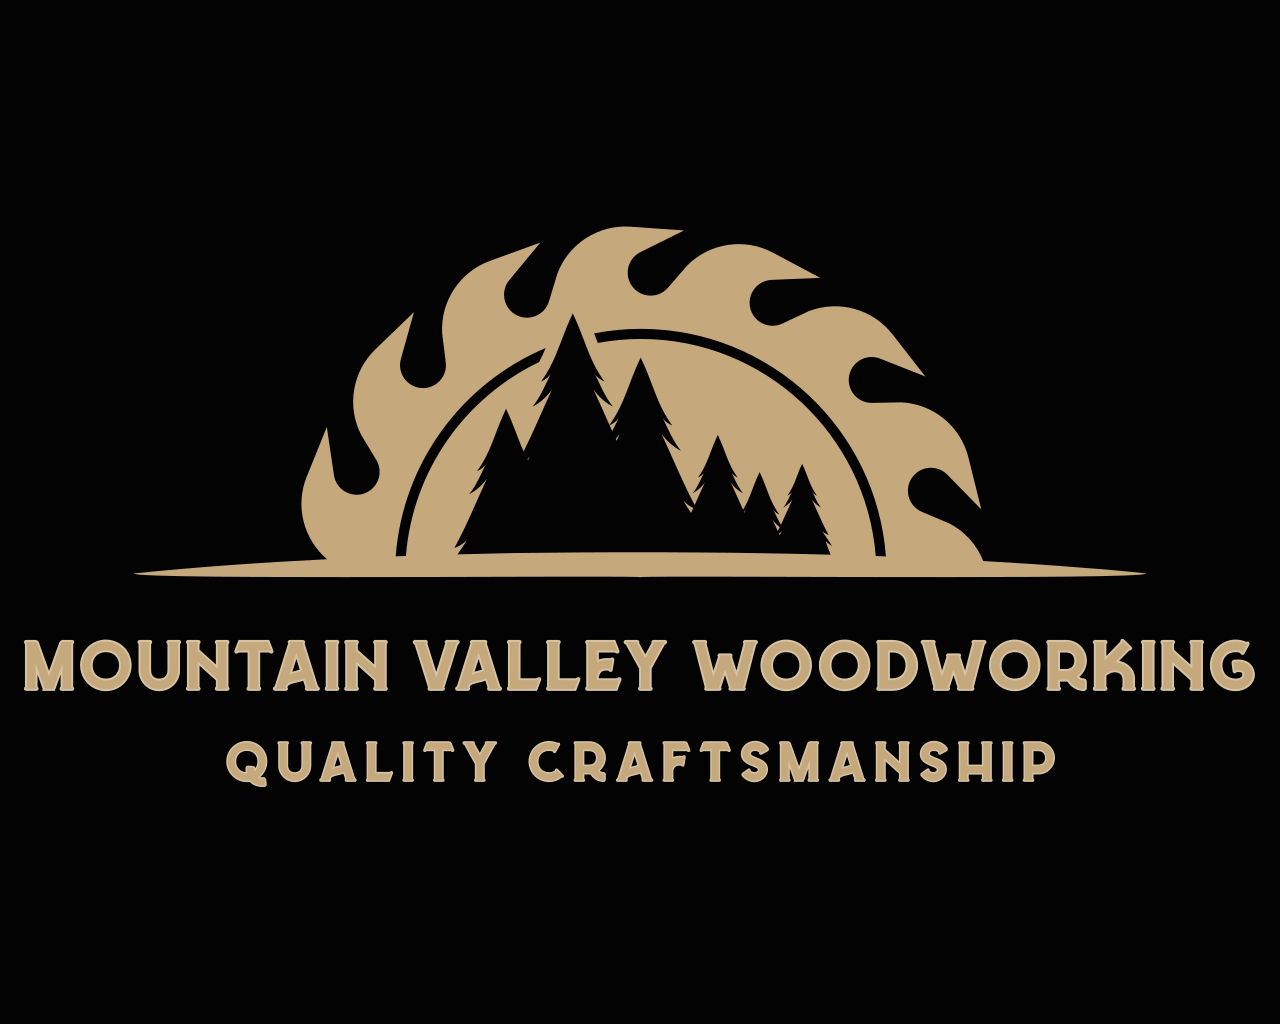 Mountain Valley Woodworking